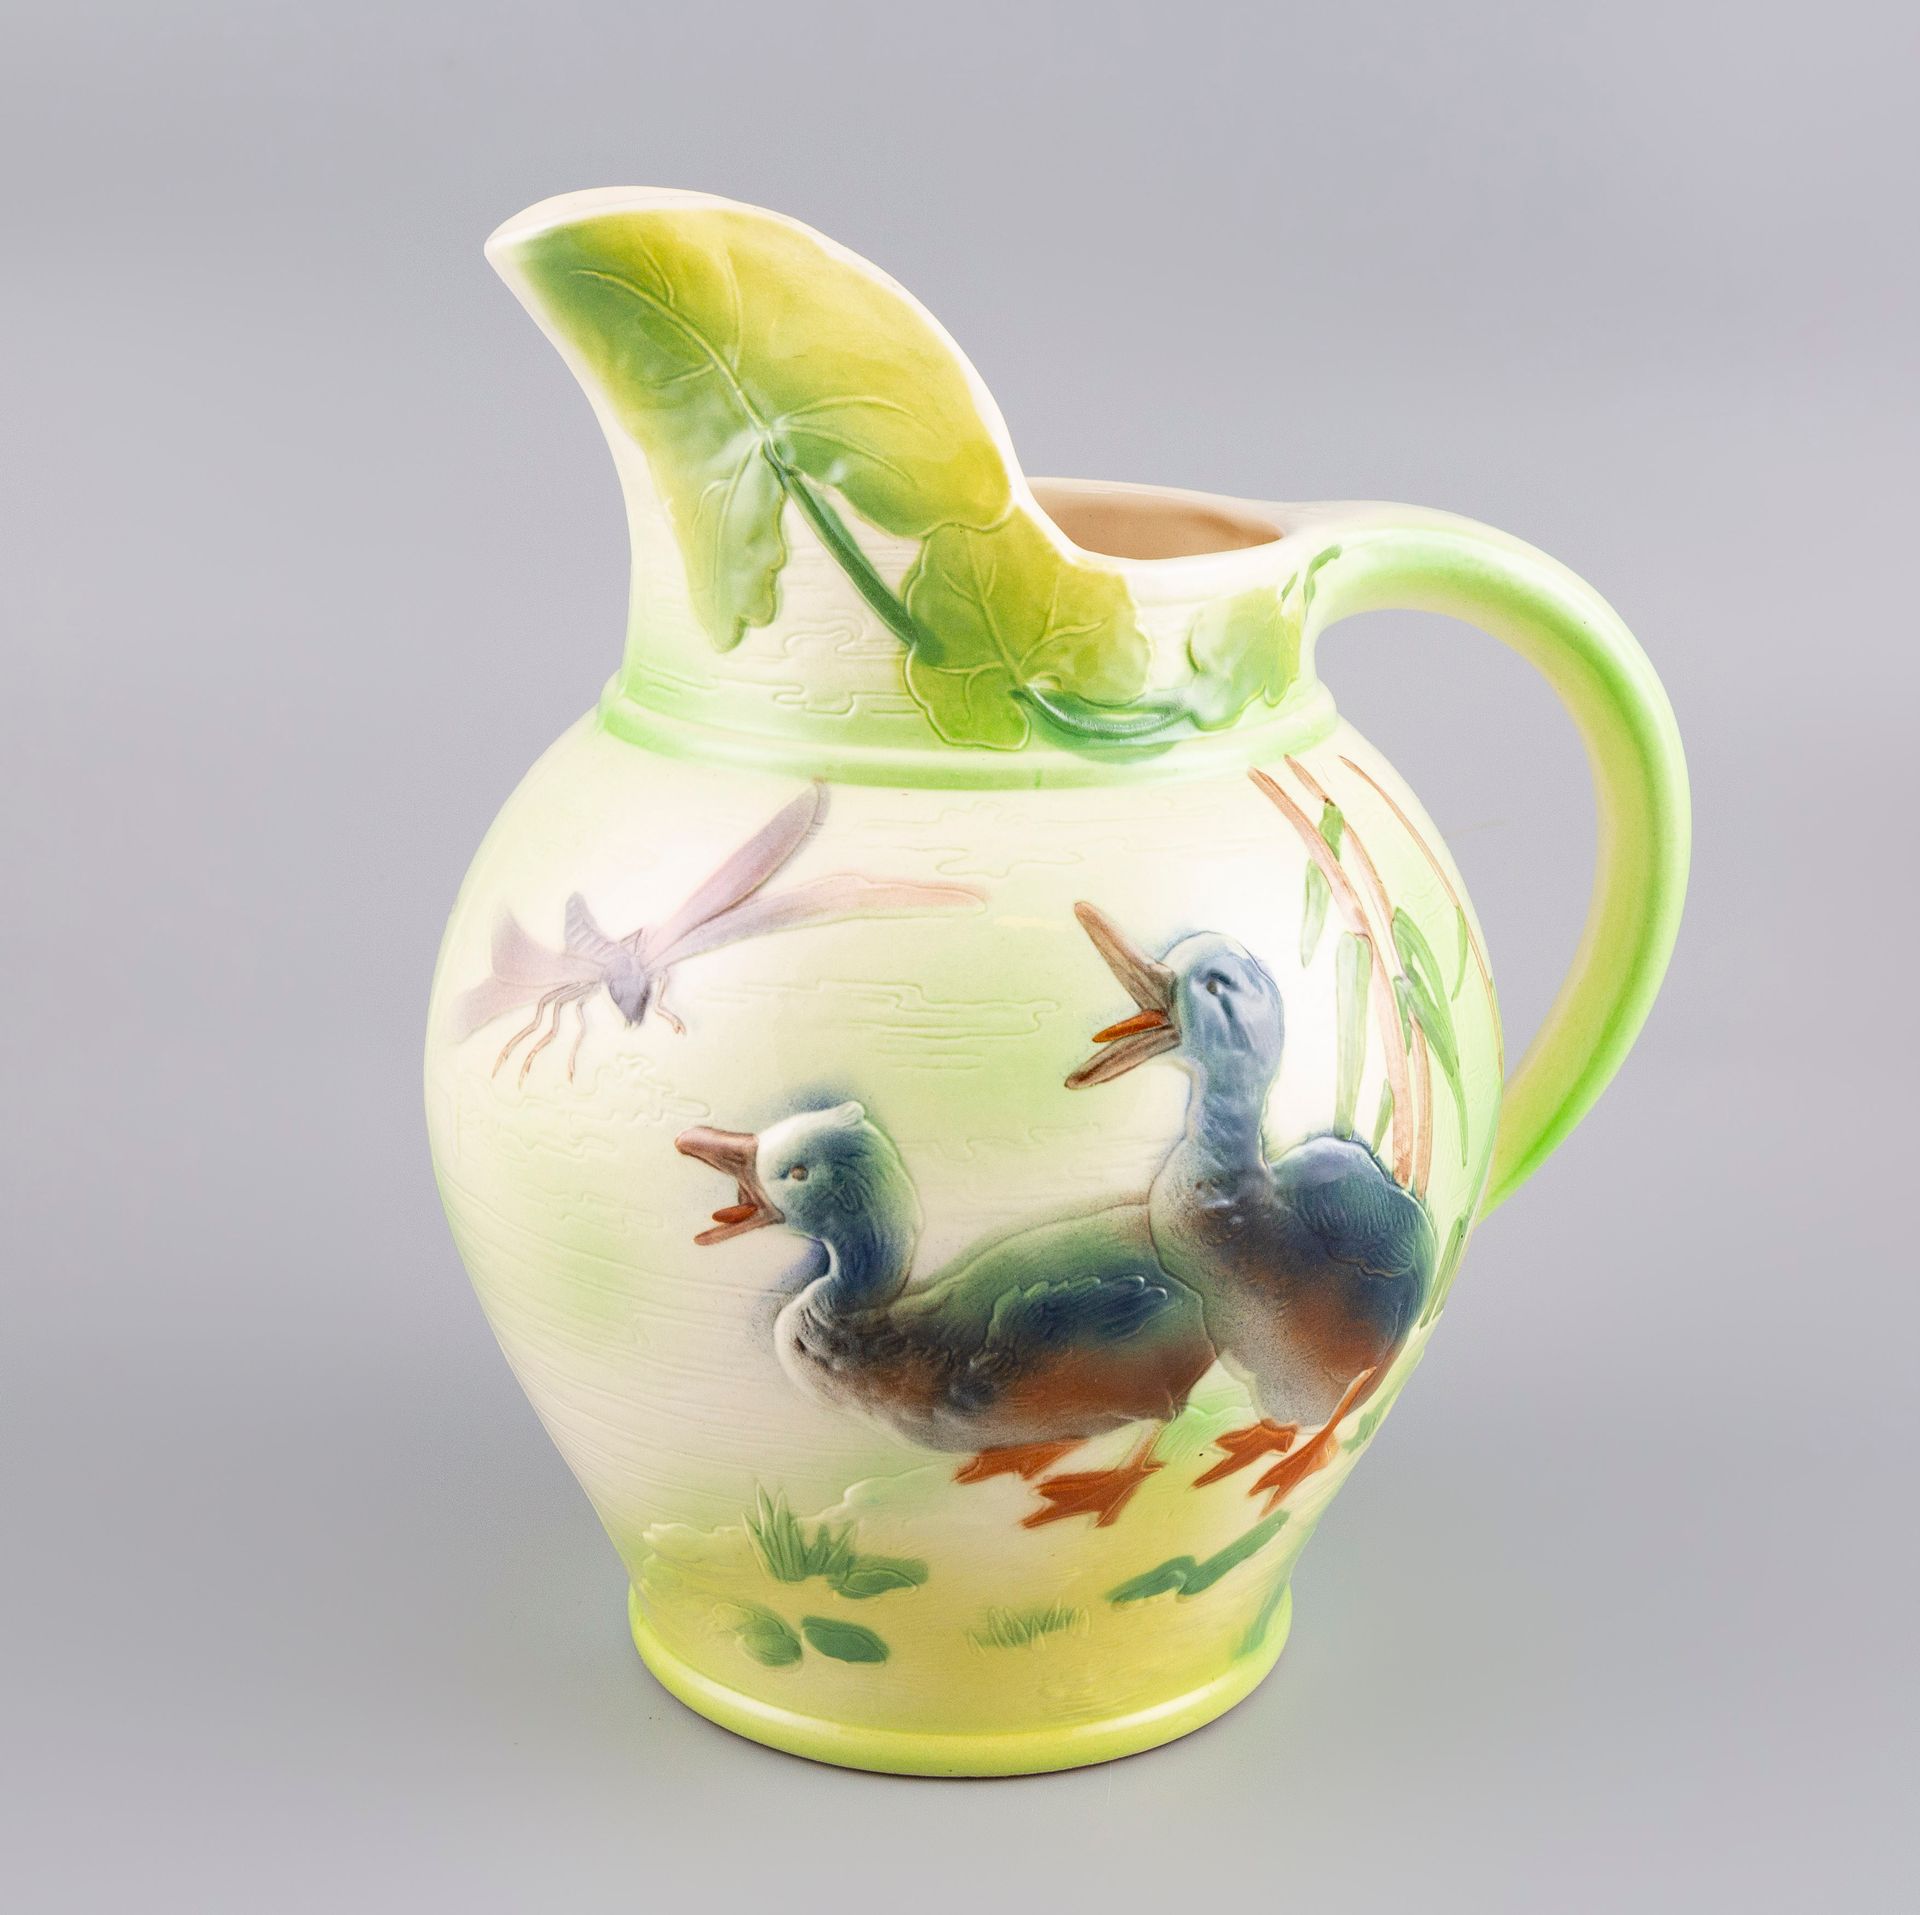 Null SAINT CLEMENT. Earthenware jug with ducks on a green background. H. 25cm.